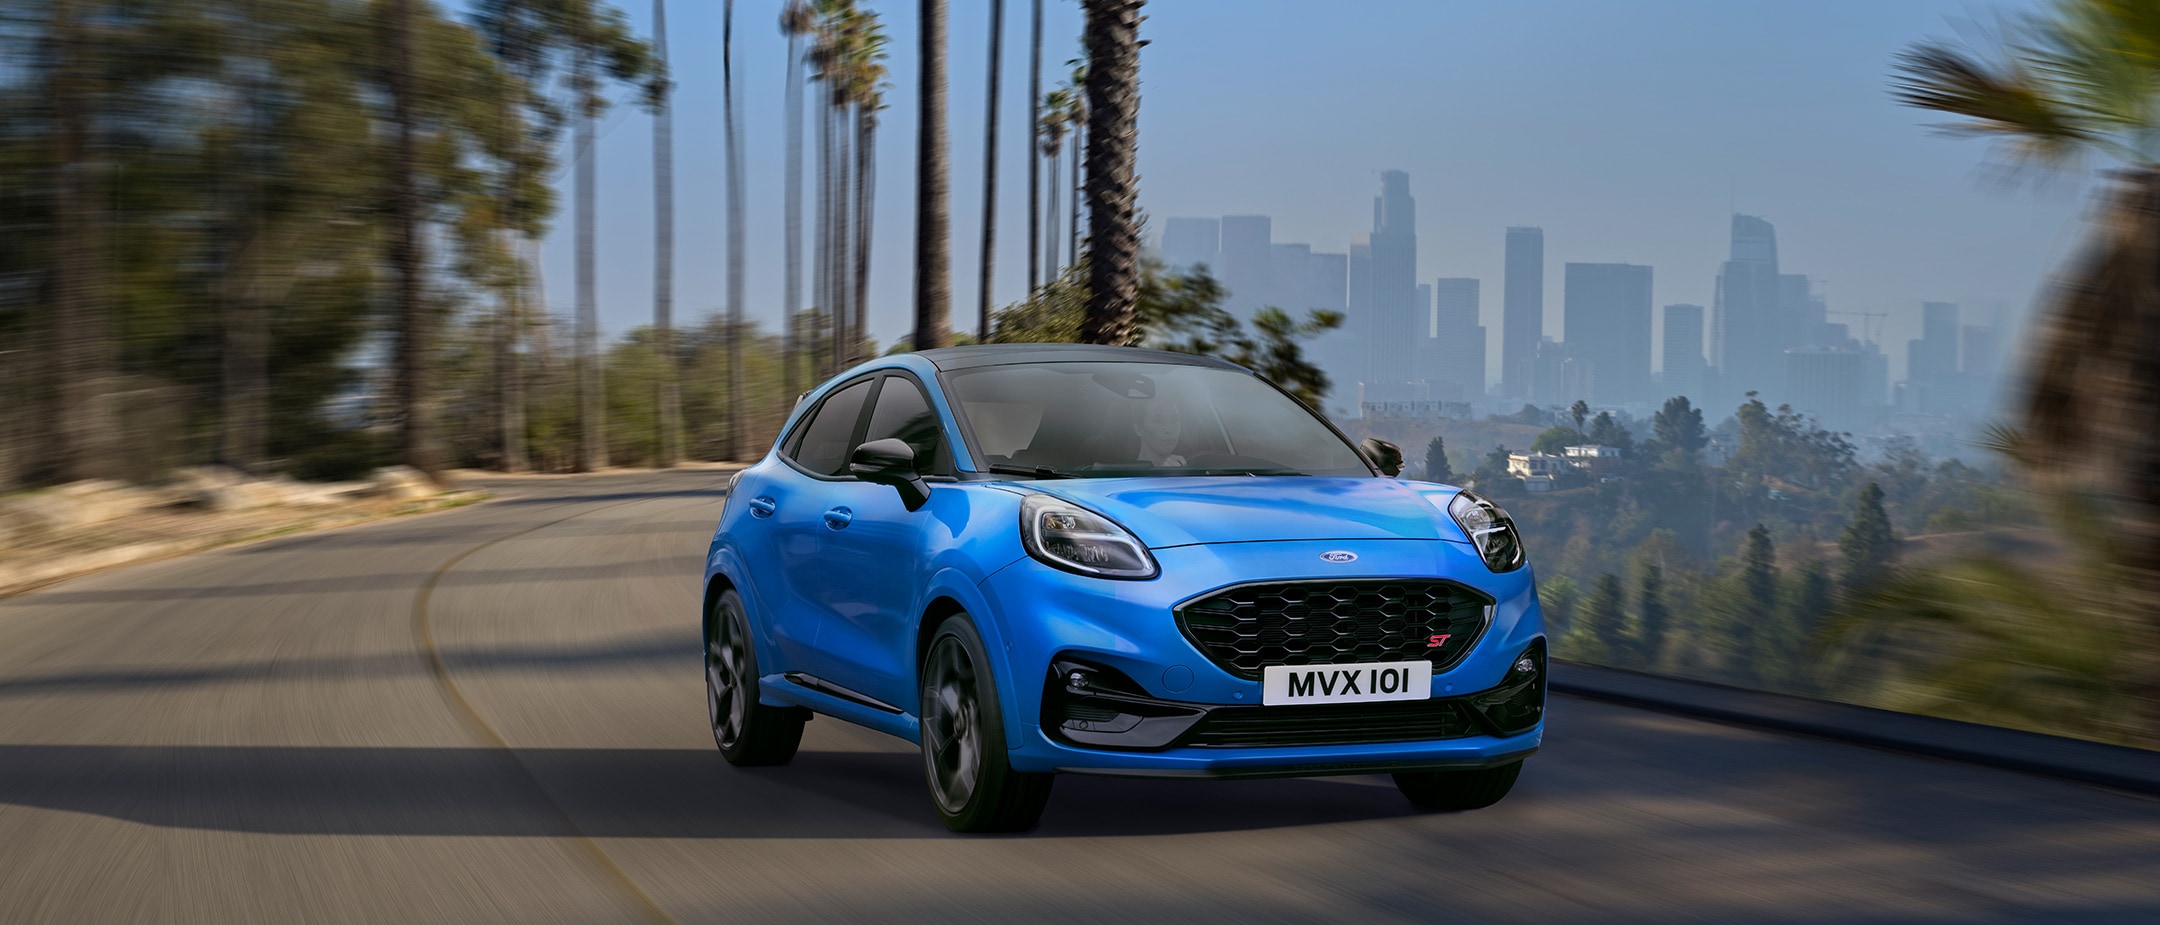 Meet the 2021 Ford Puma ST, the Sporty Euro CUV With Hot-Hatch Soul